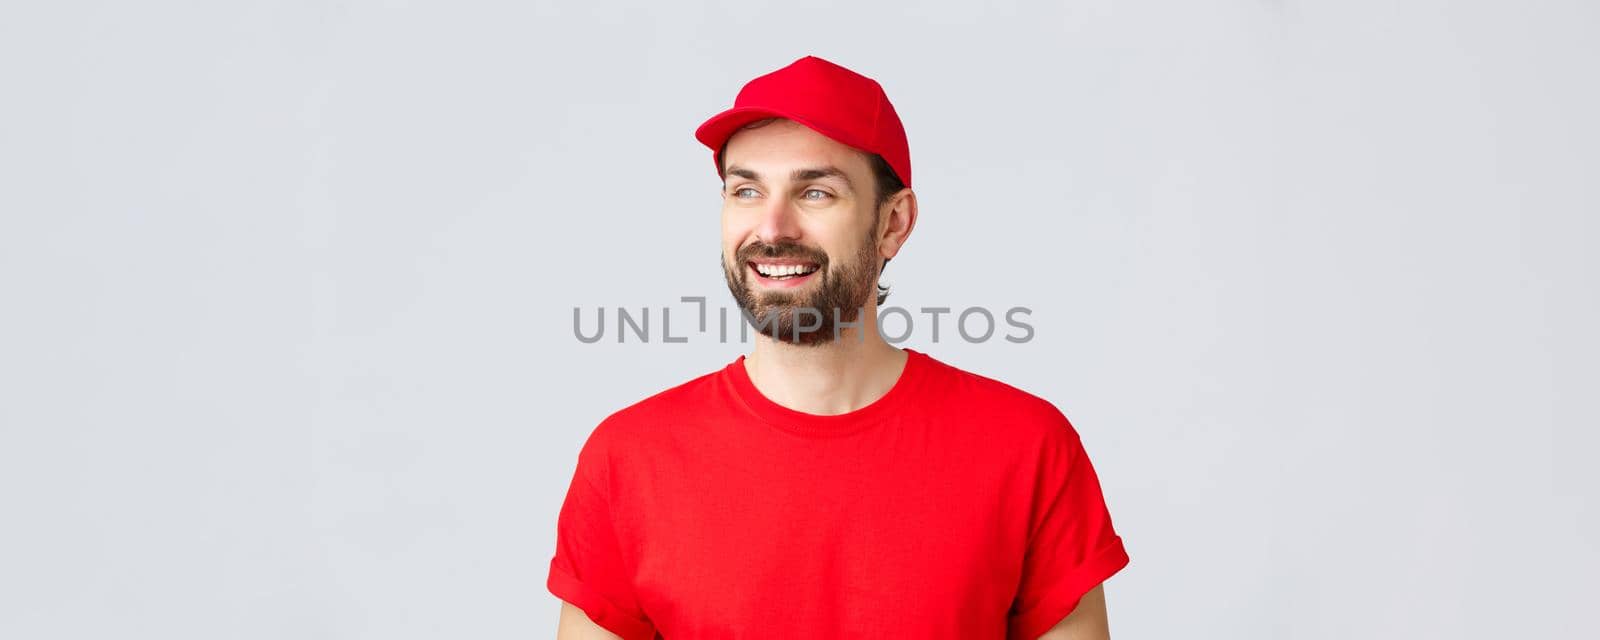 Online shopping, delivery during quarantine and takeaway concept. Cheerful bearded guy in red uniform cap and t-shirt, looking away with pleased smile, reading banner sign, grey background.